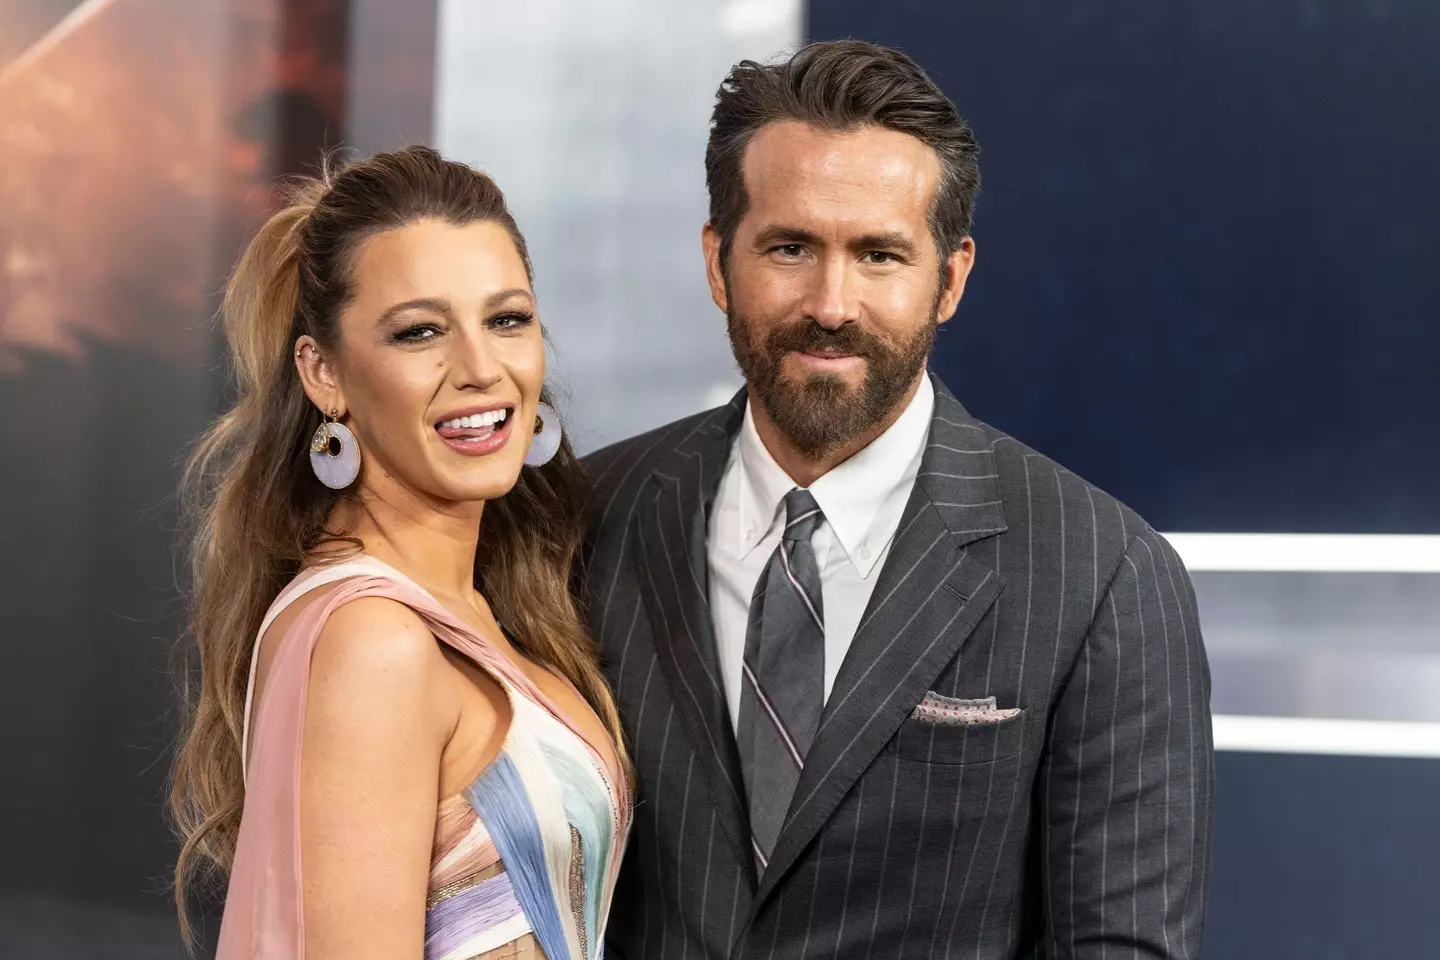 Blake Lively and Ryan Reynolds pictured together earlier this year.